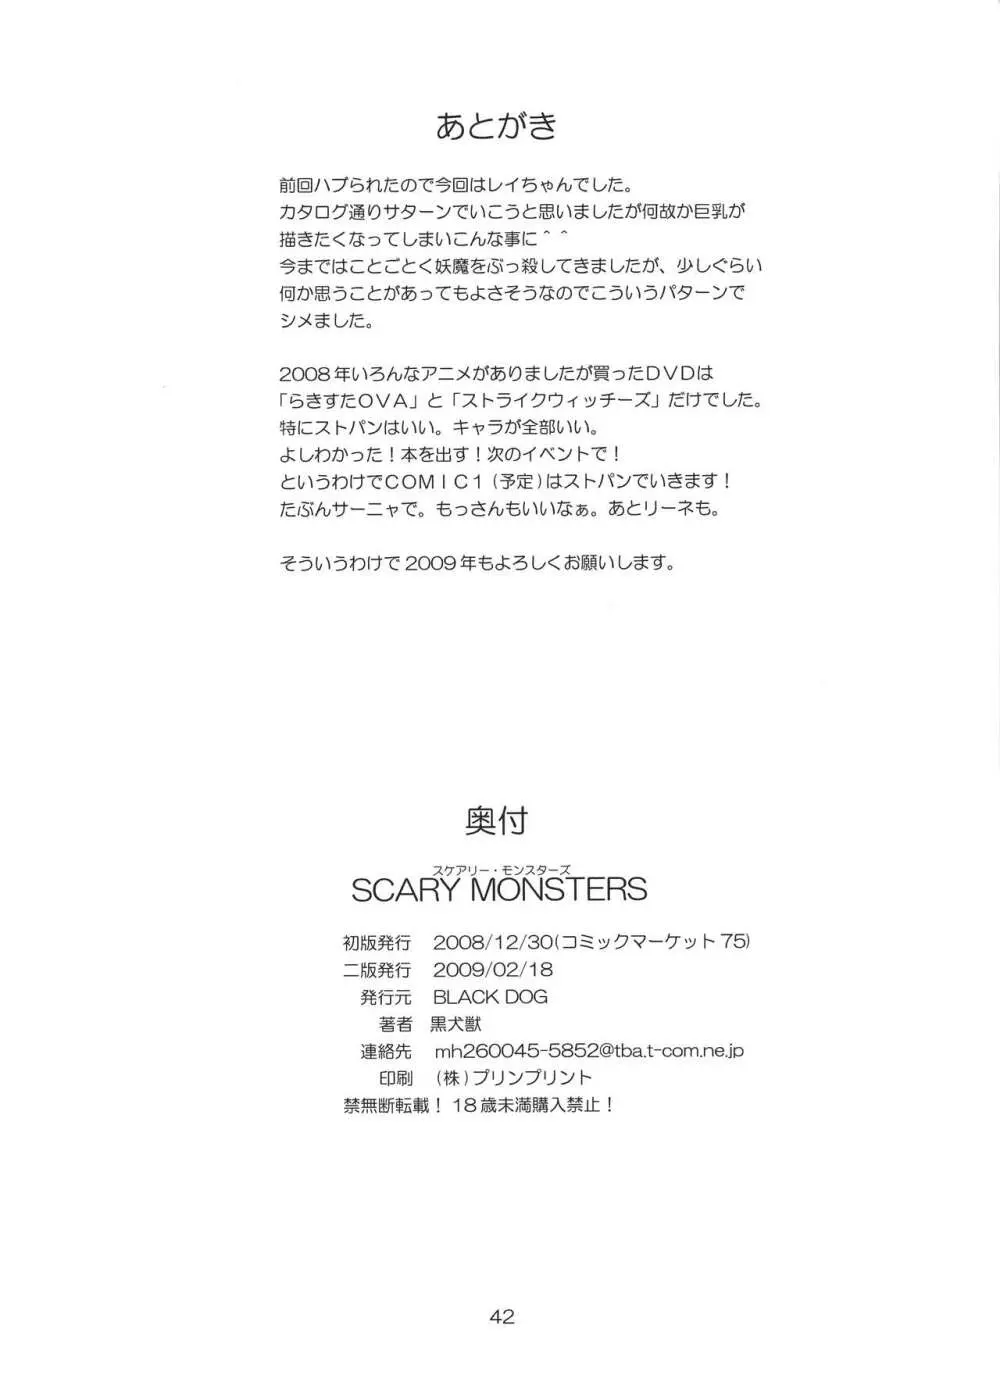 Scary Monsters 24ページ